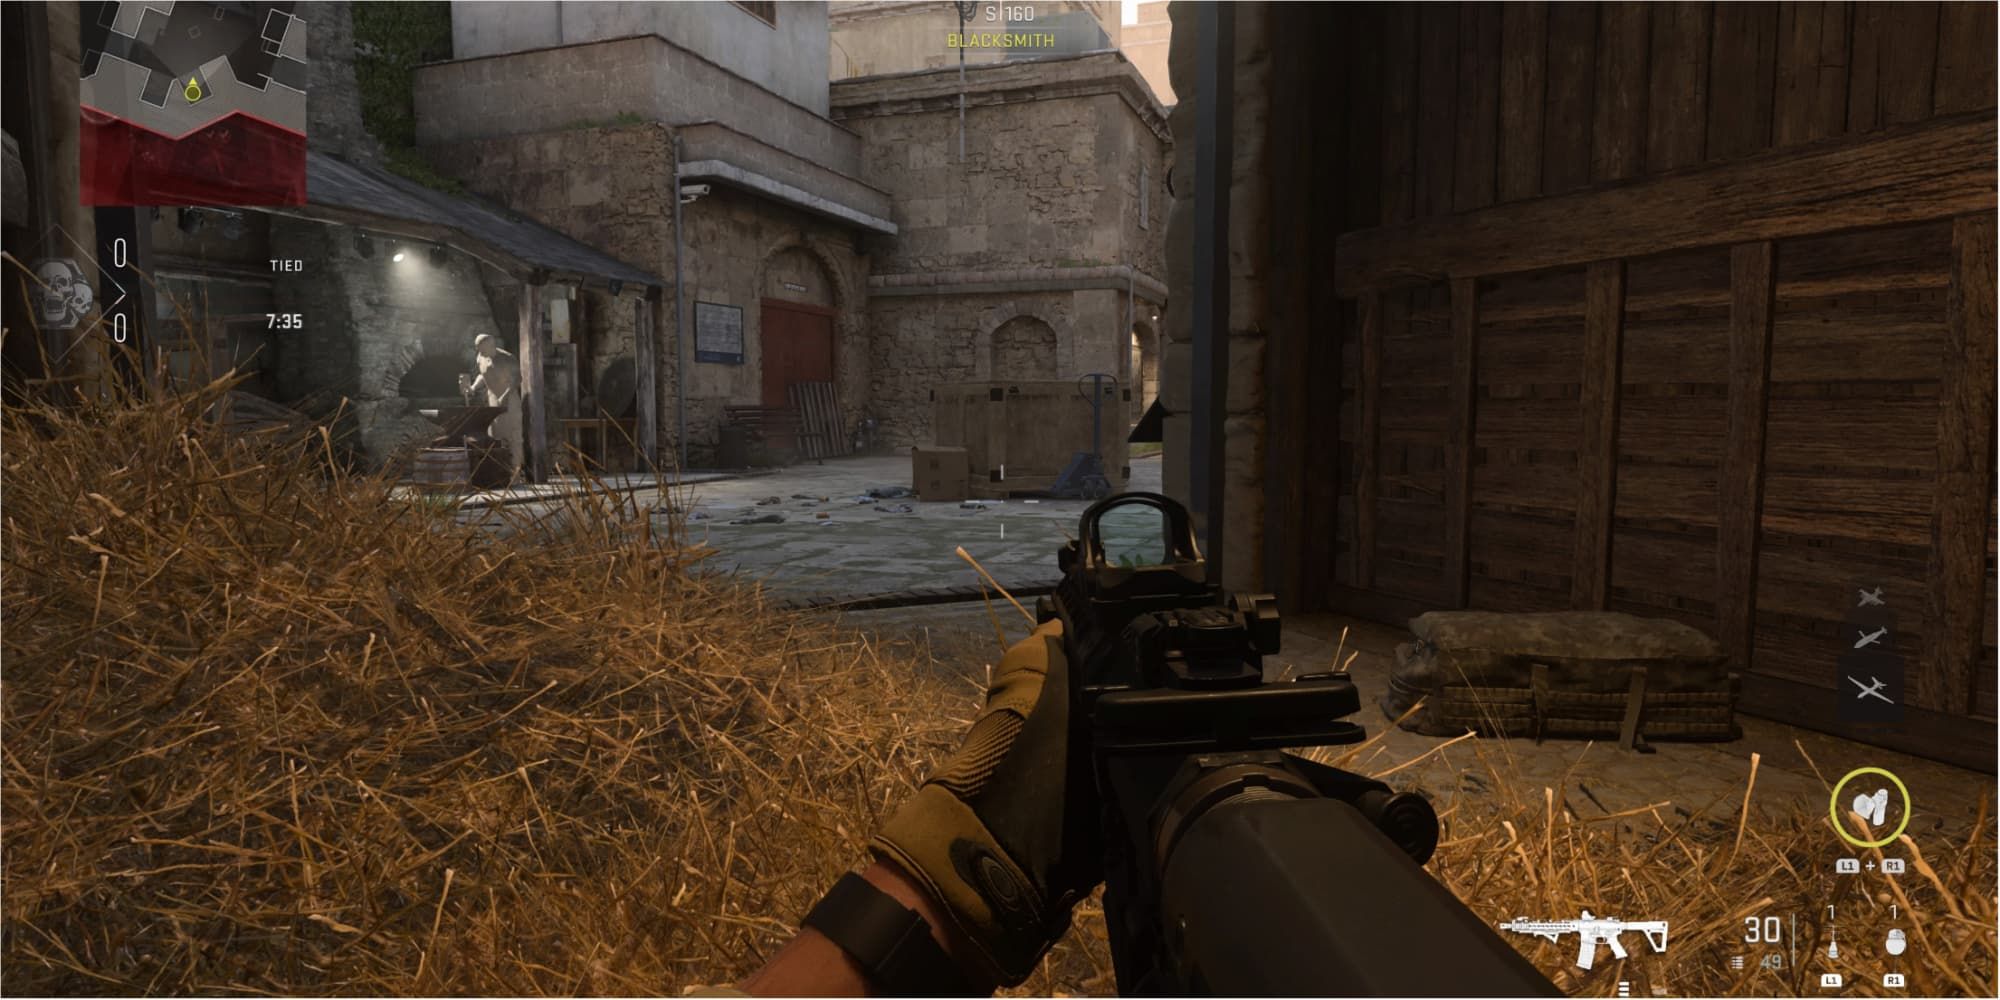 A camper goes prone in the hay at the stables of Al Bagra Fortress in Call of Duty: Modern Warfare 2